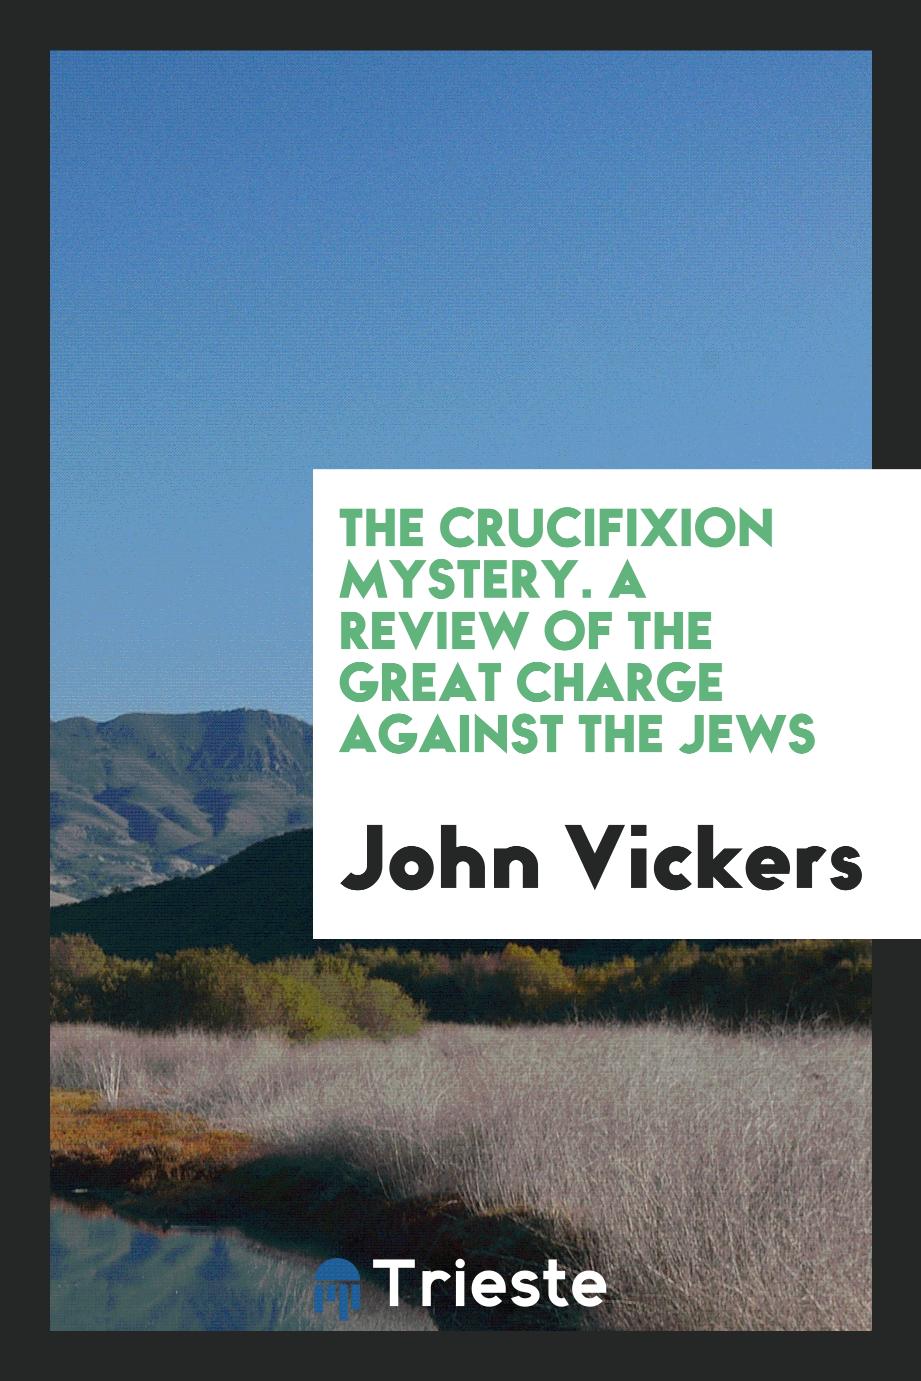 The crucifixion mystery. A review of the great charge against the Jews